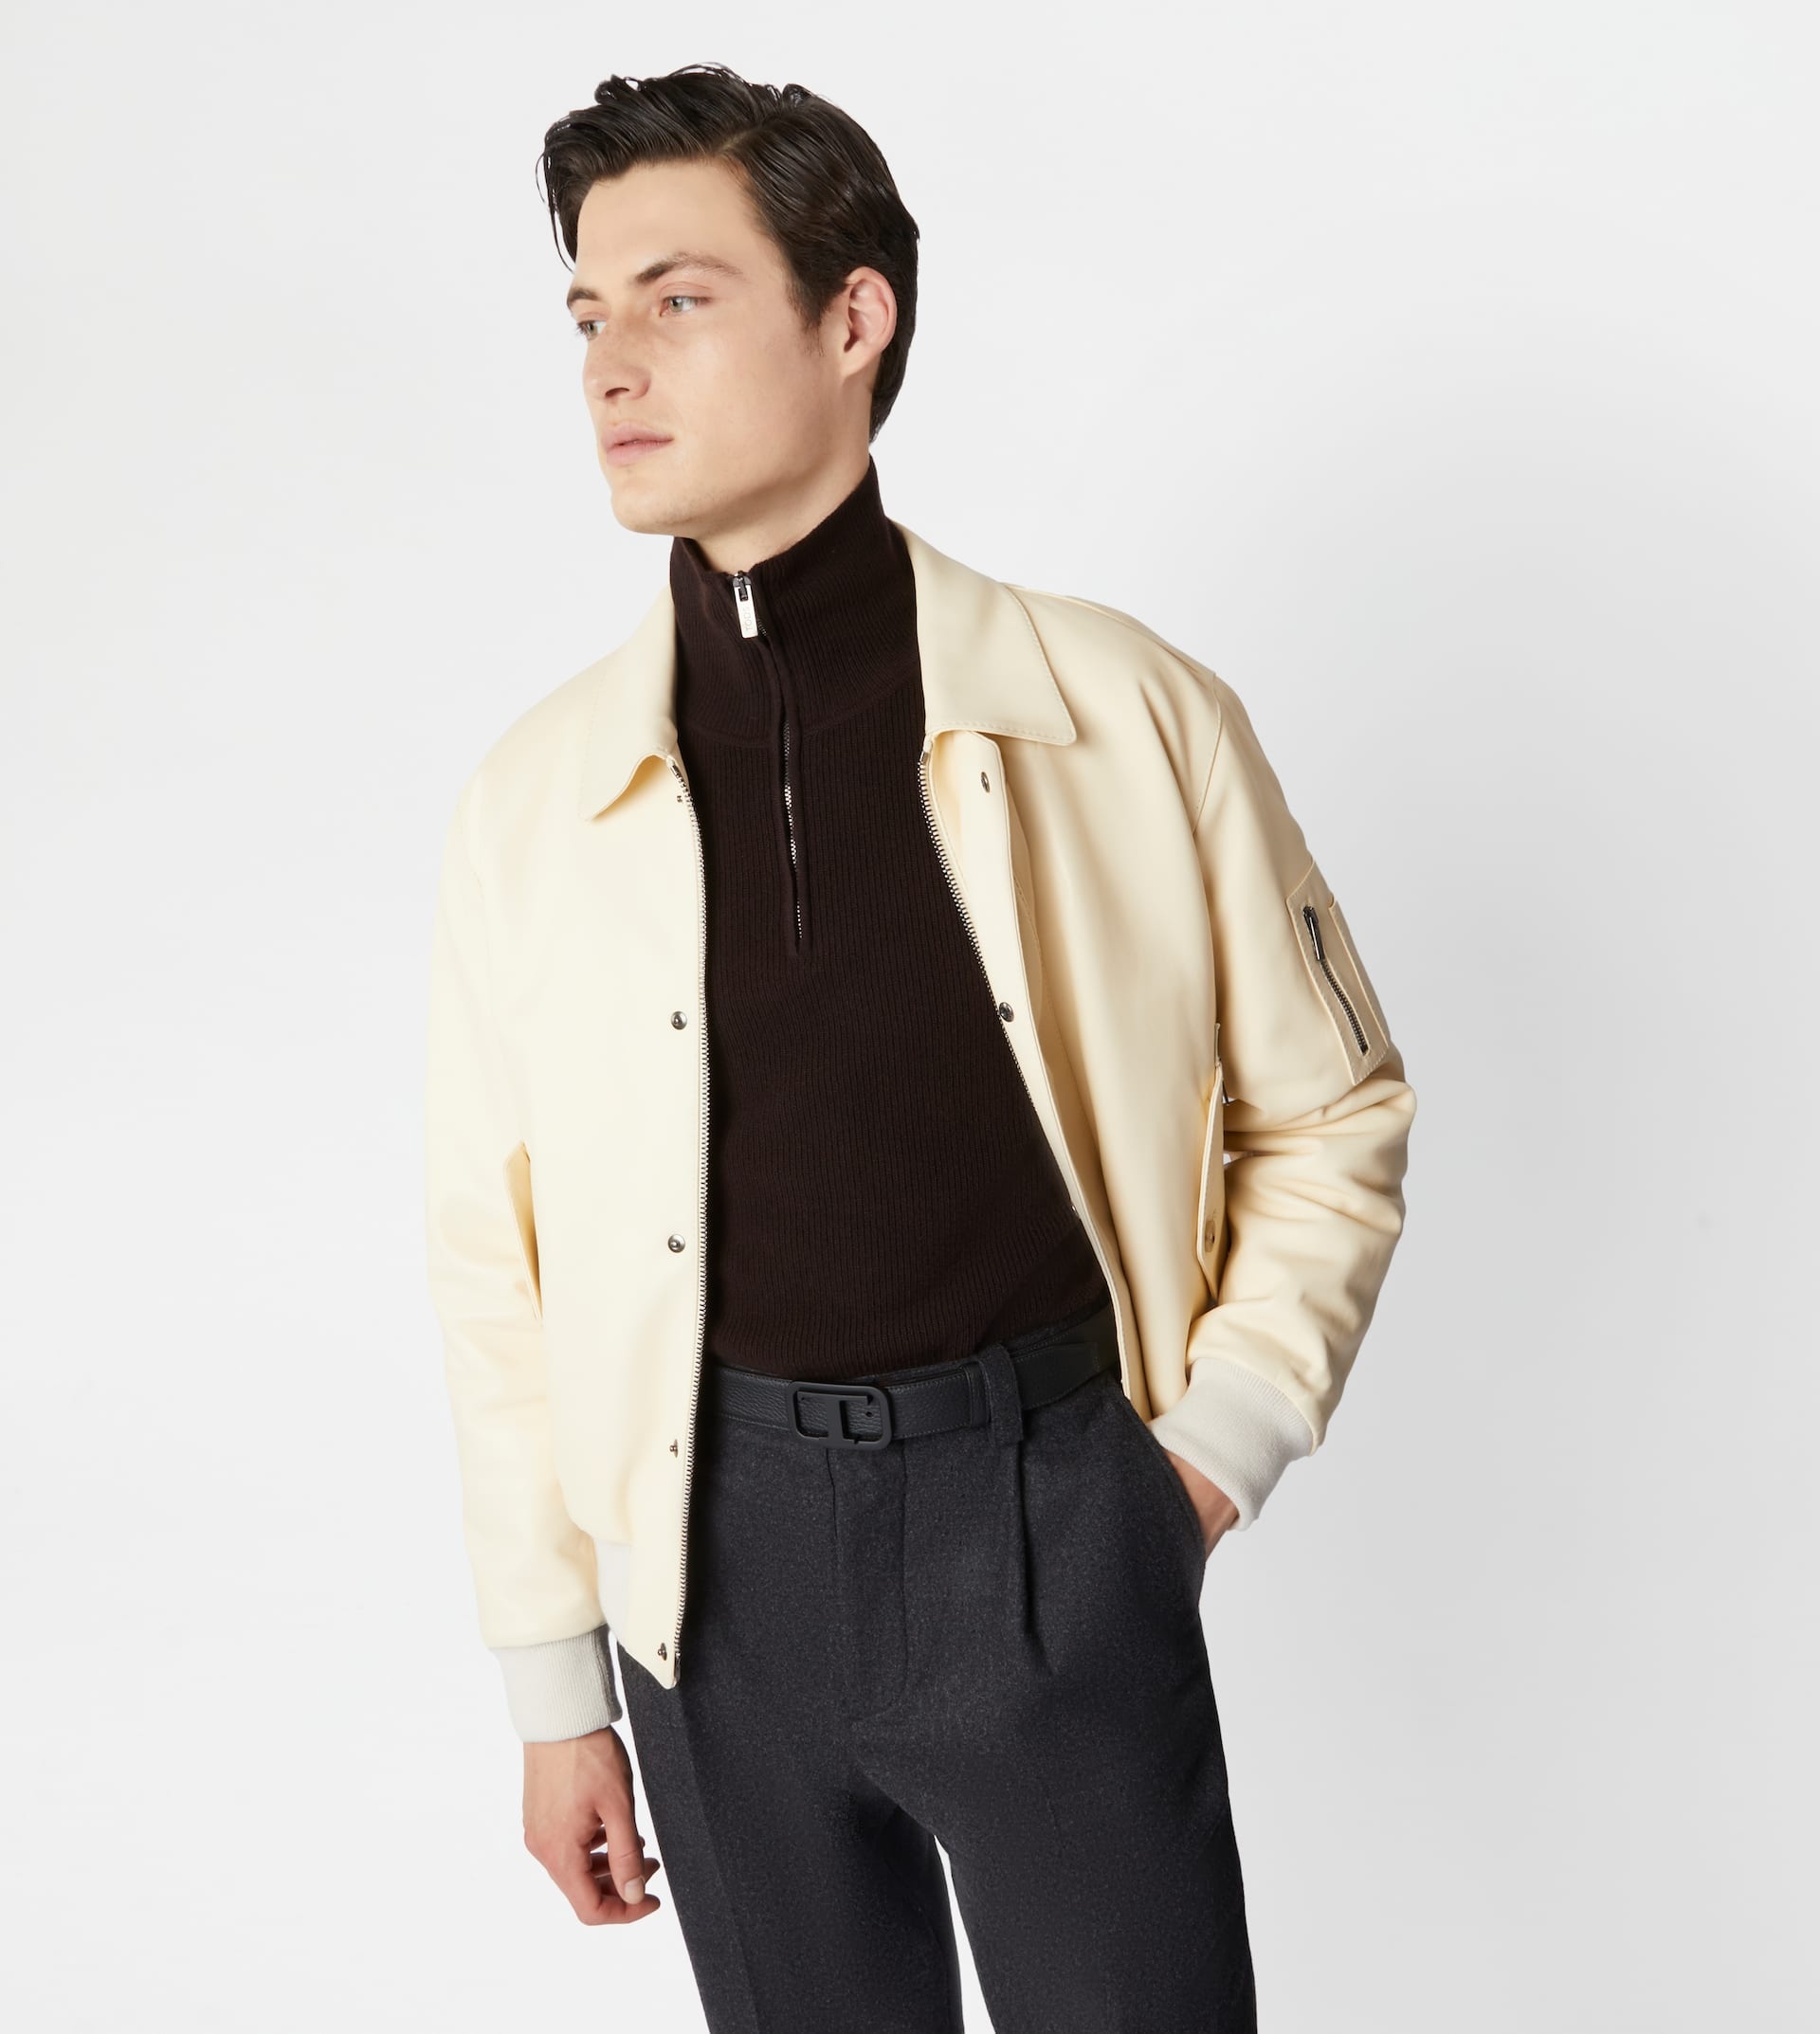 BOMBER JACKET IN NAPPA LEATHER - WHITE - 7